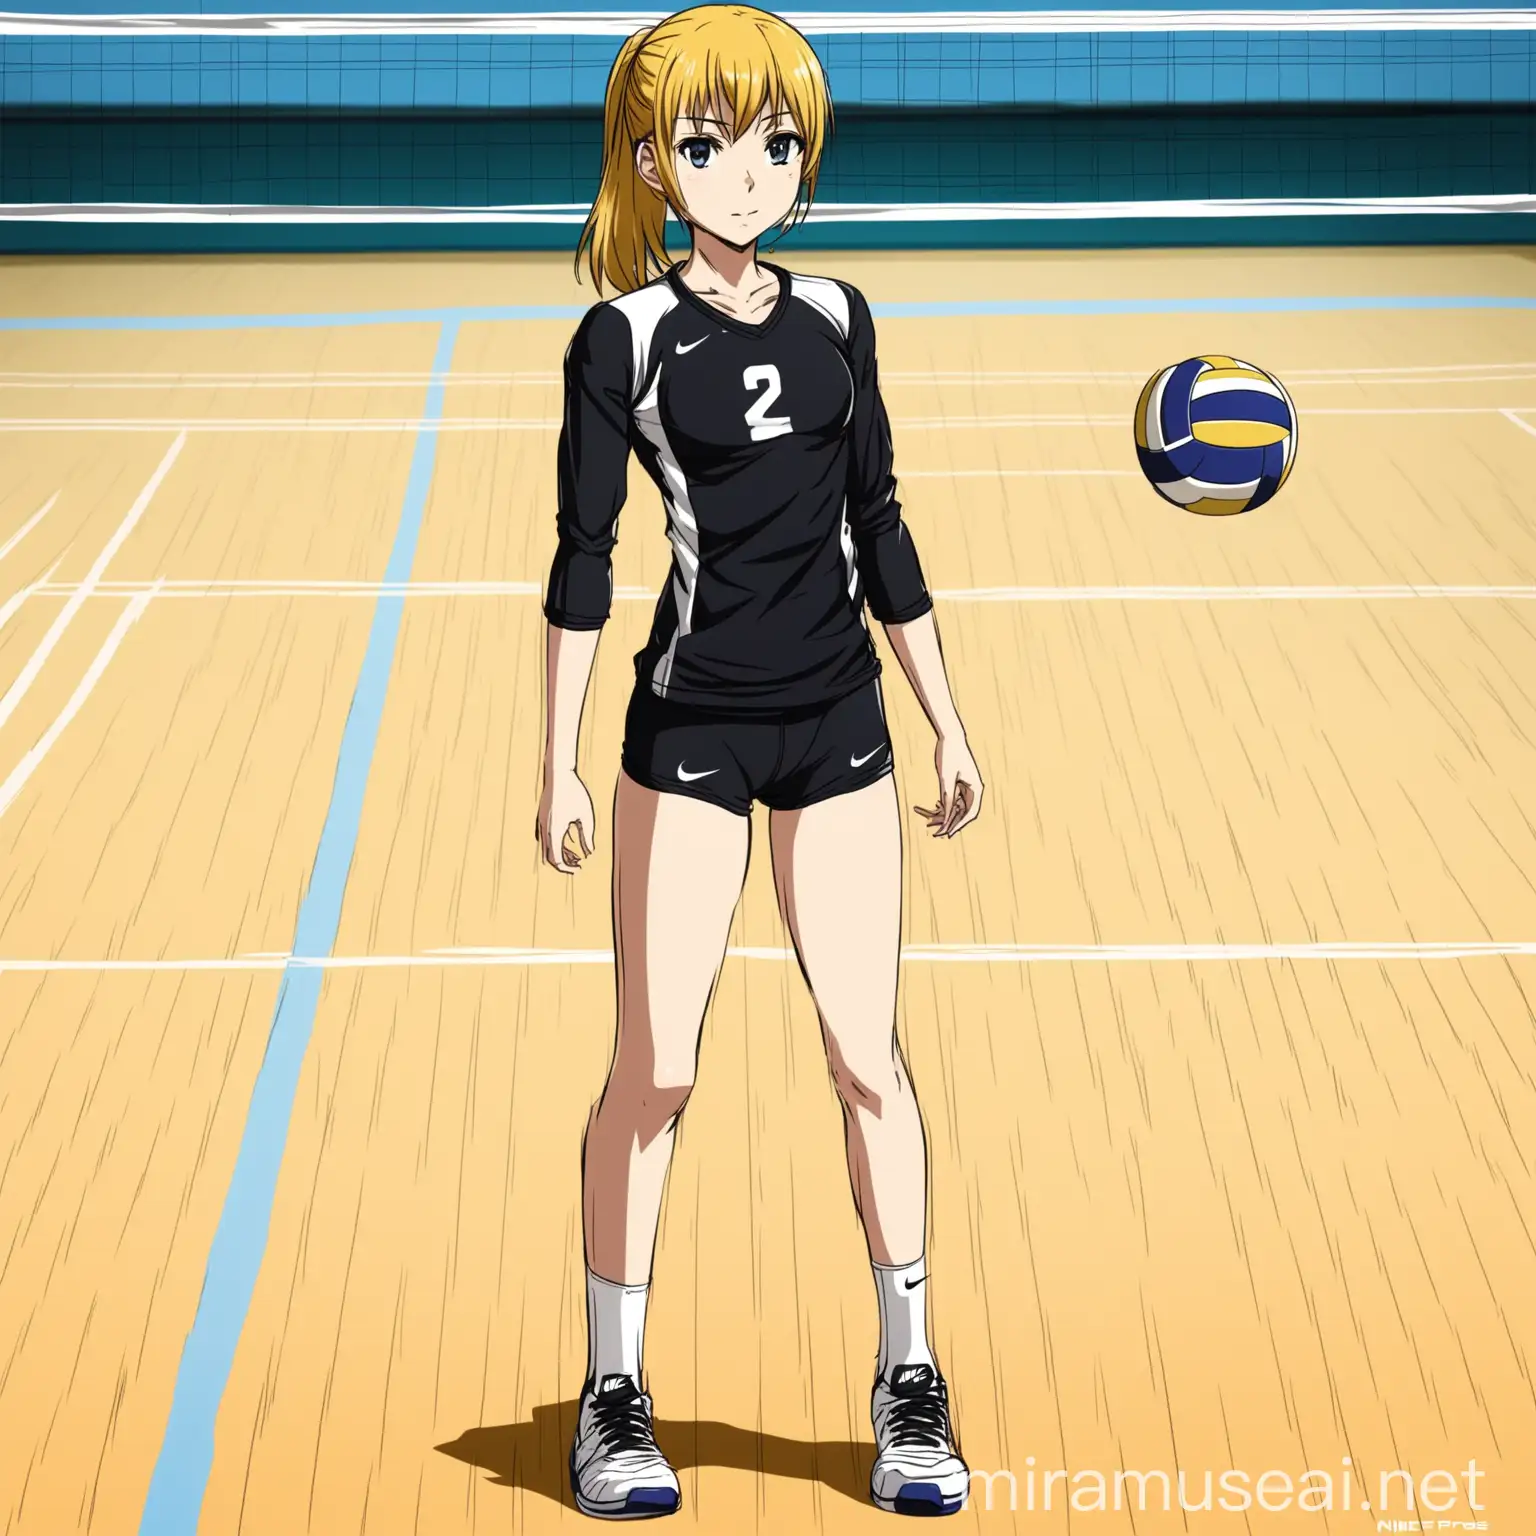 Petite High School Girl in Nike Pros on Volleyball Court